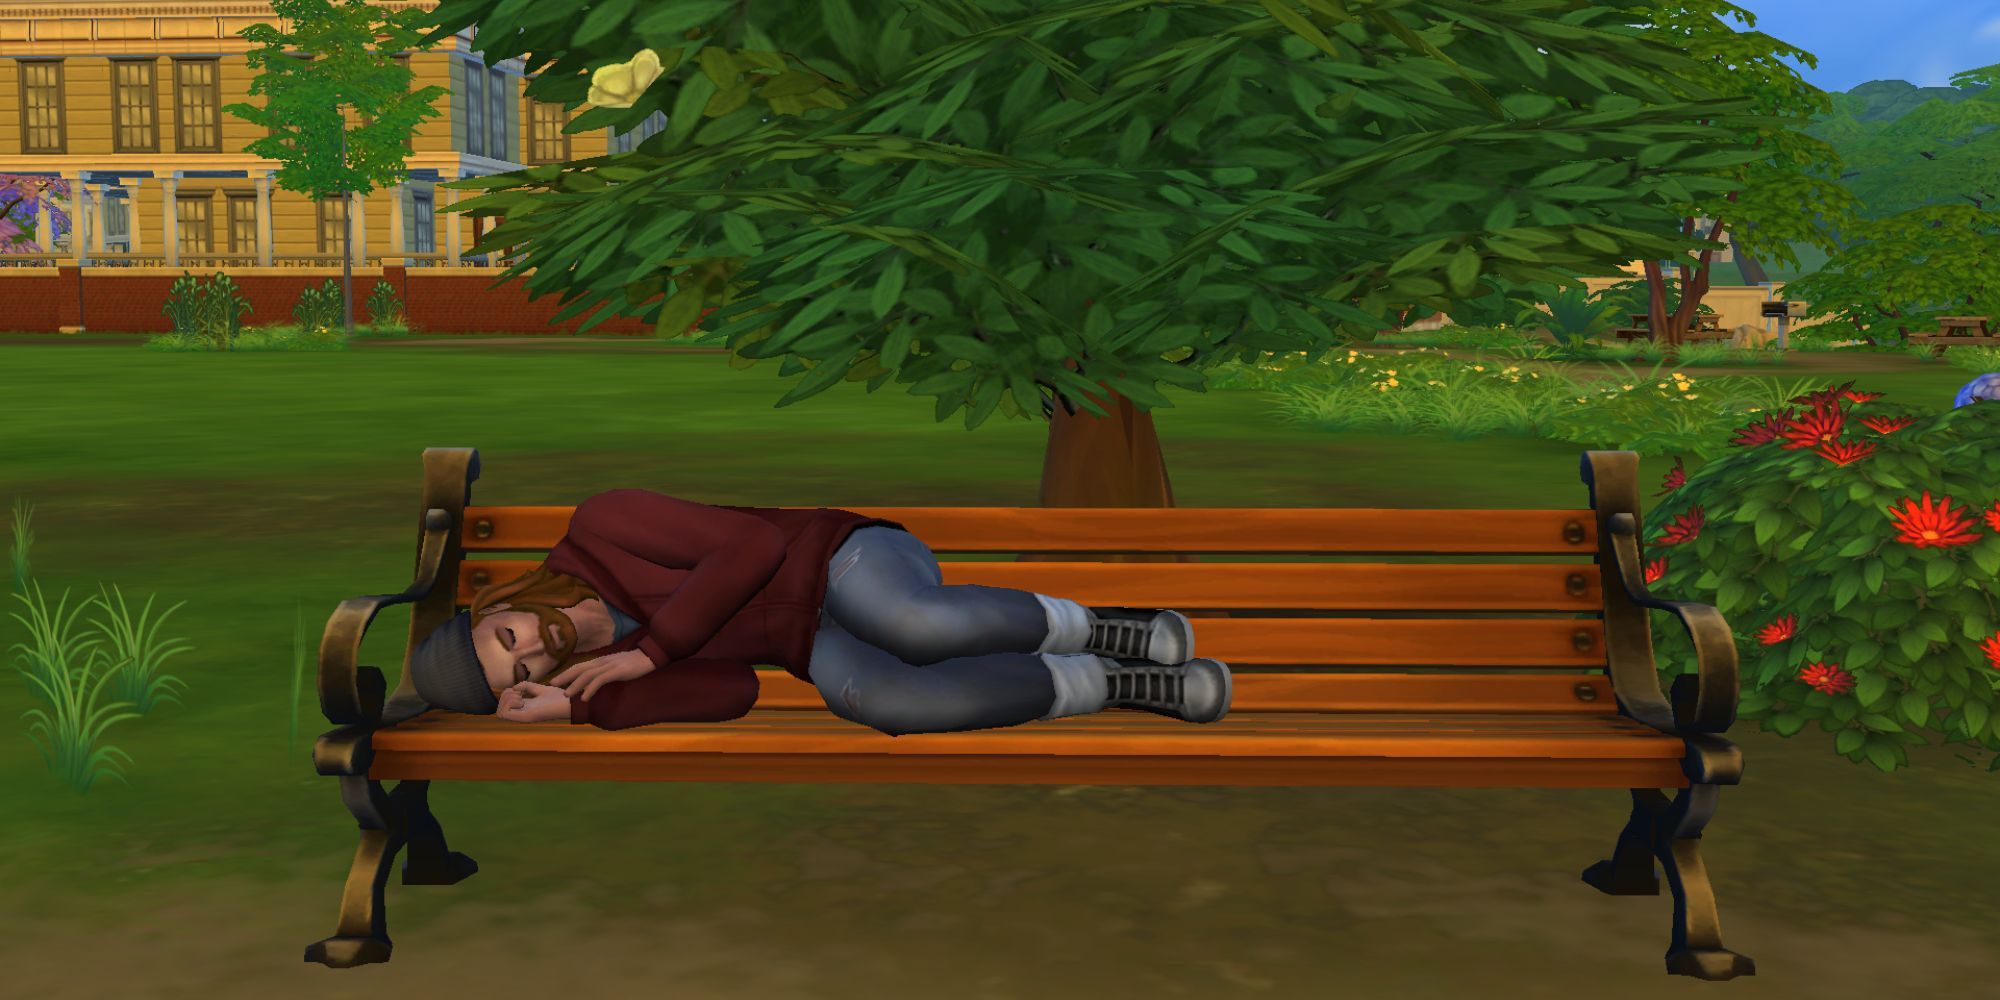 The Sims 4 Homeless Sim Sleeping On The Bench